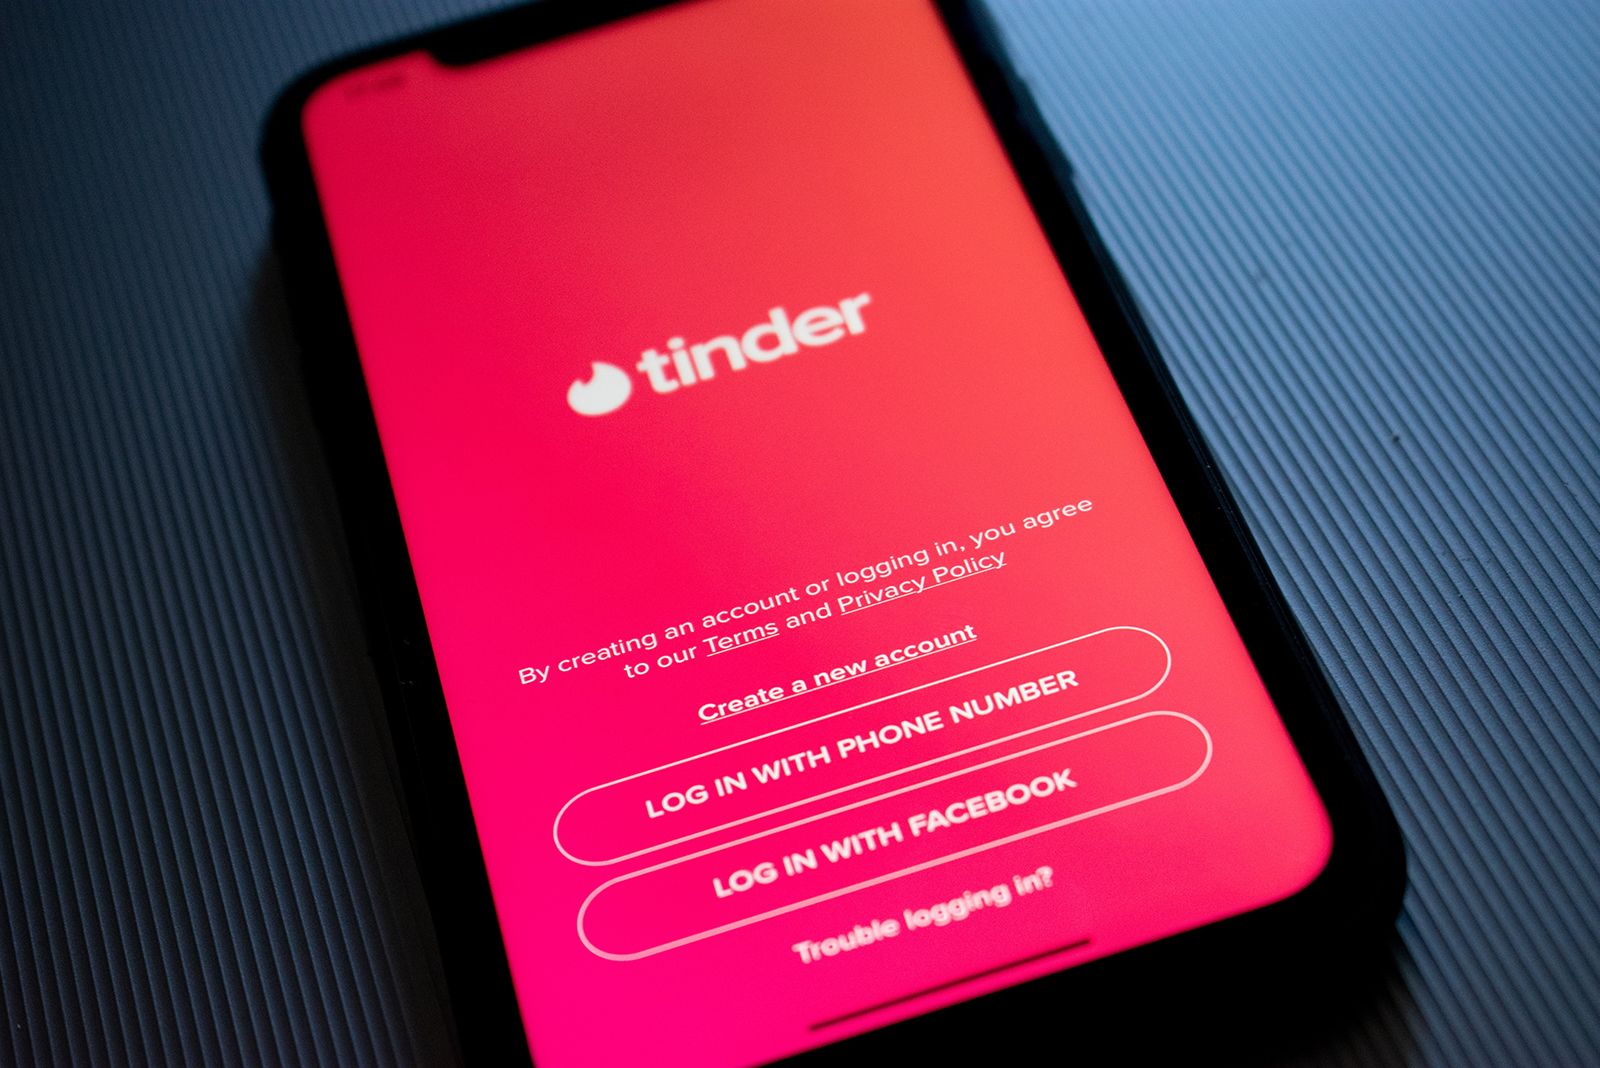 Tinder is rushing a live video feature so you can virtually date in the pandemic image 1